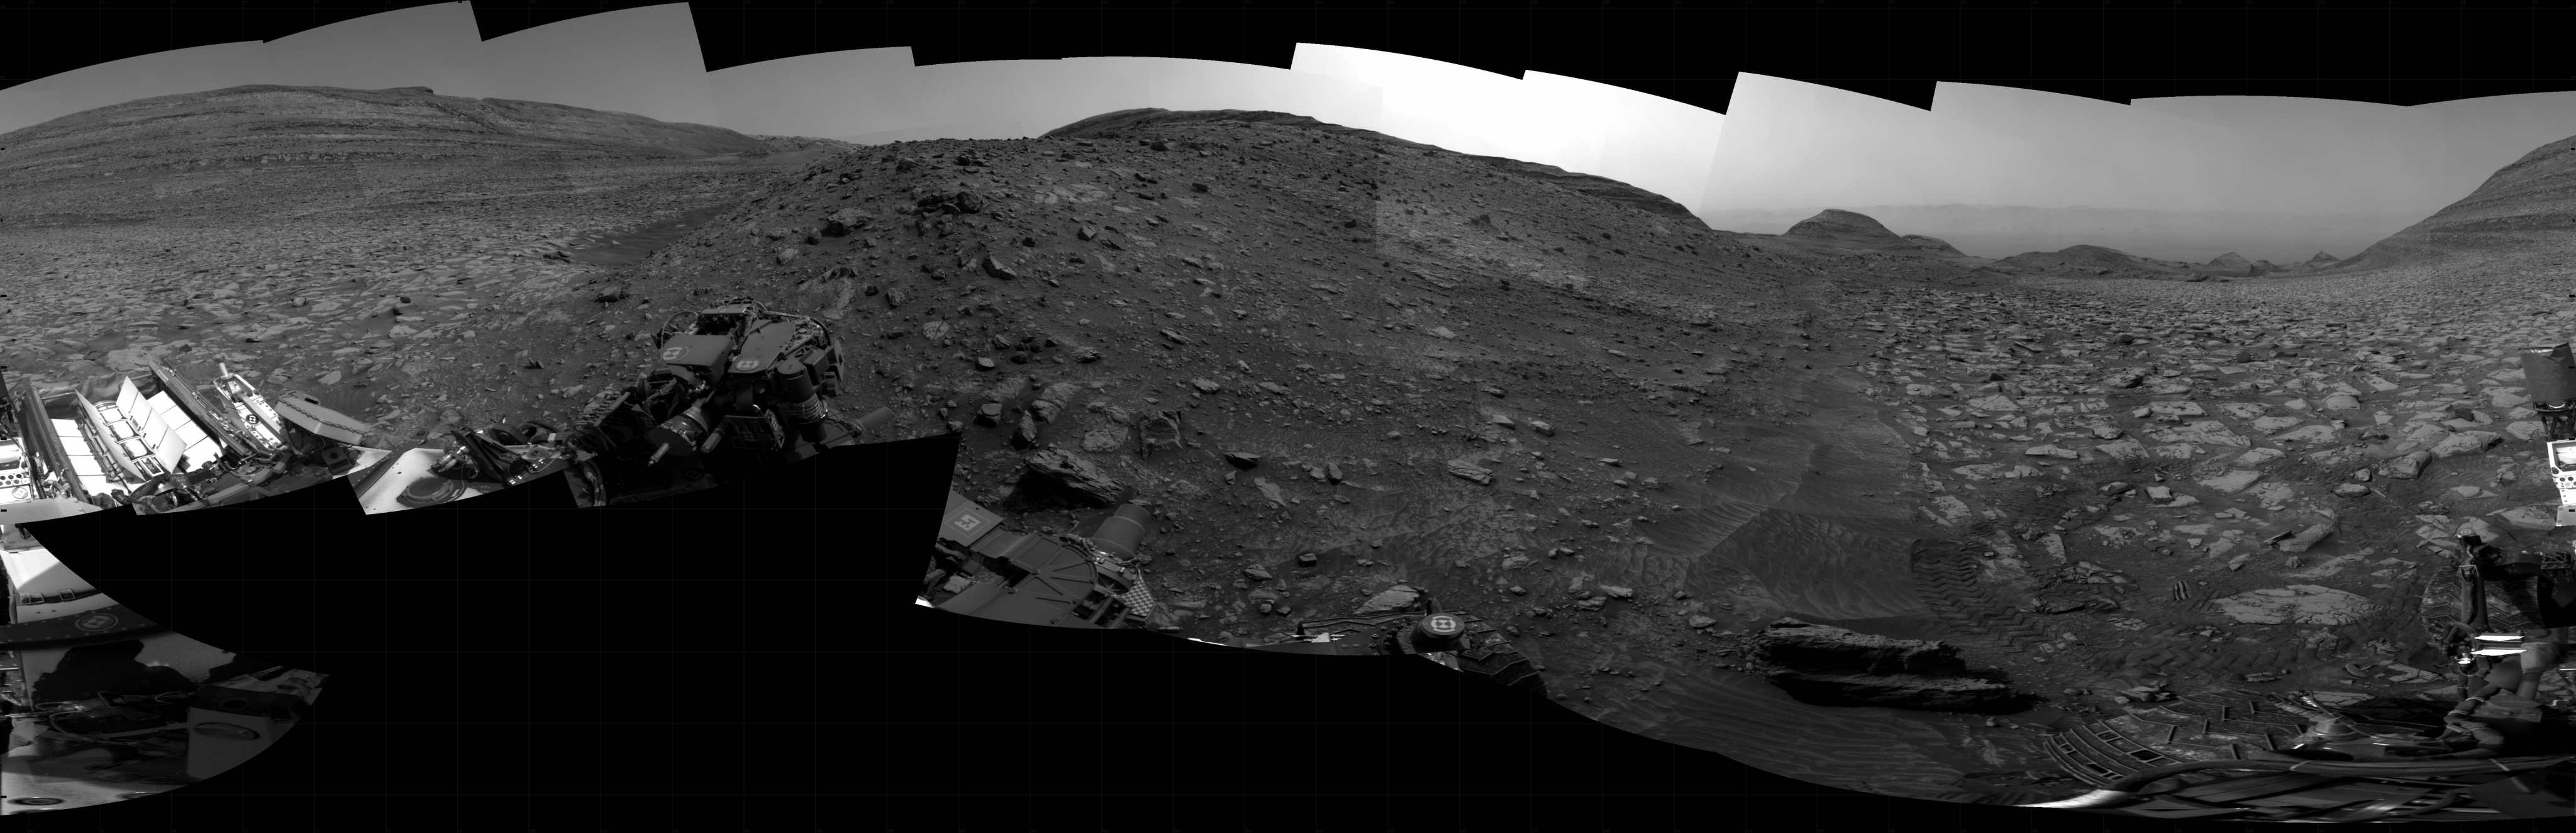 Curiosity took the images on May 01, 2024, Sol 4171 of the Mars Science Laboratory mission at drive 6, site number 107. The local mean solar time for the image exposures was from 1 PM to 2 PM.